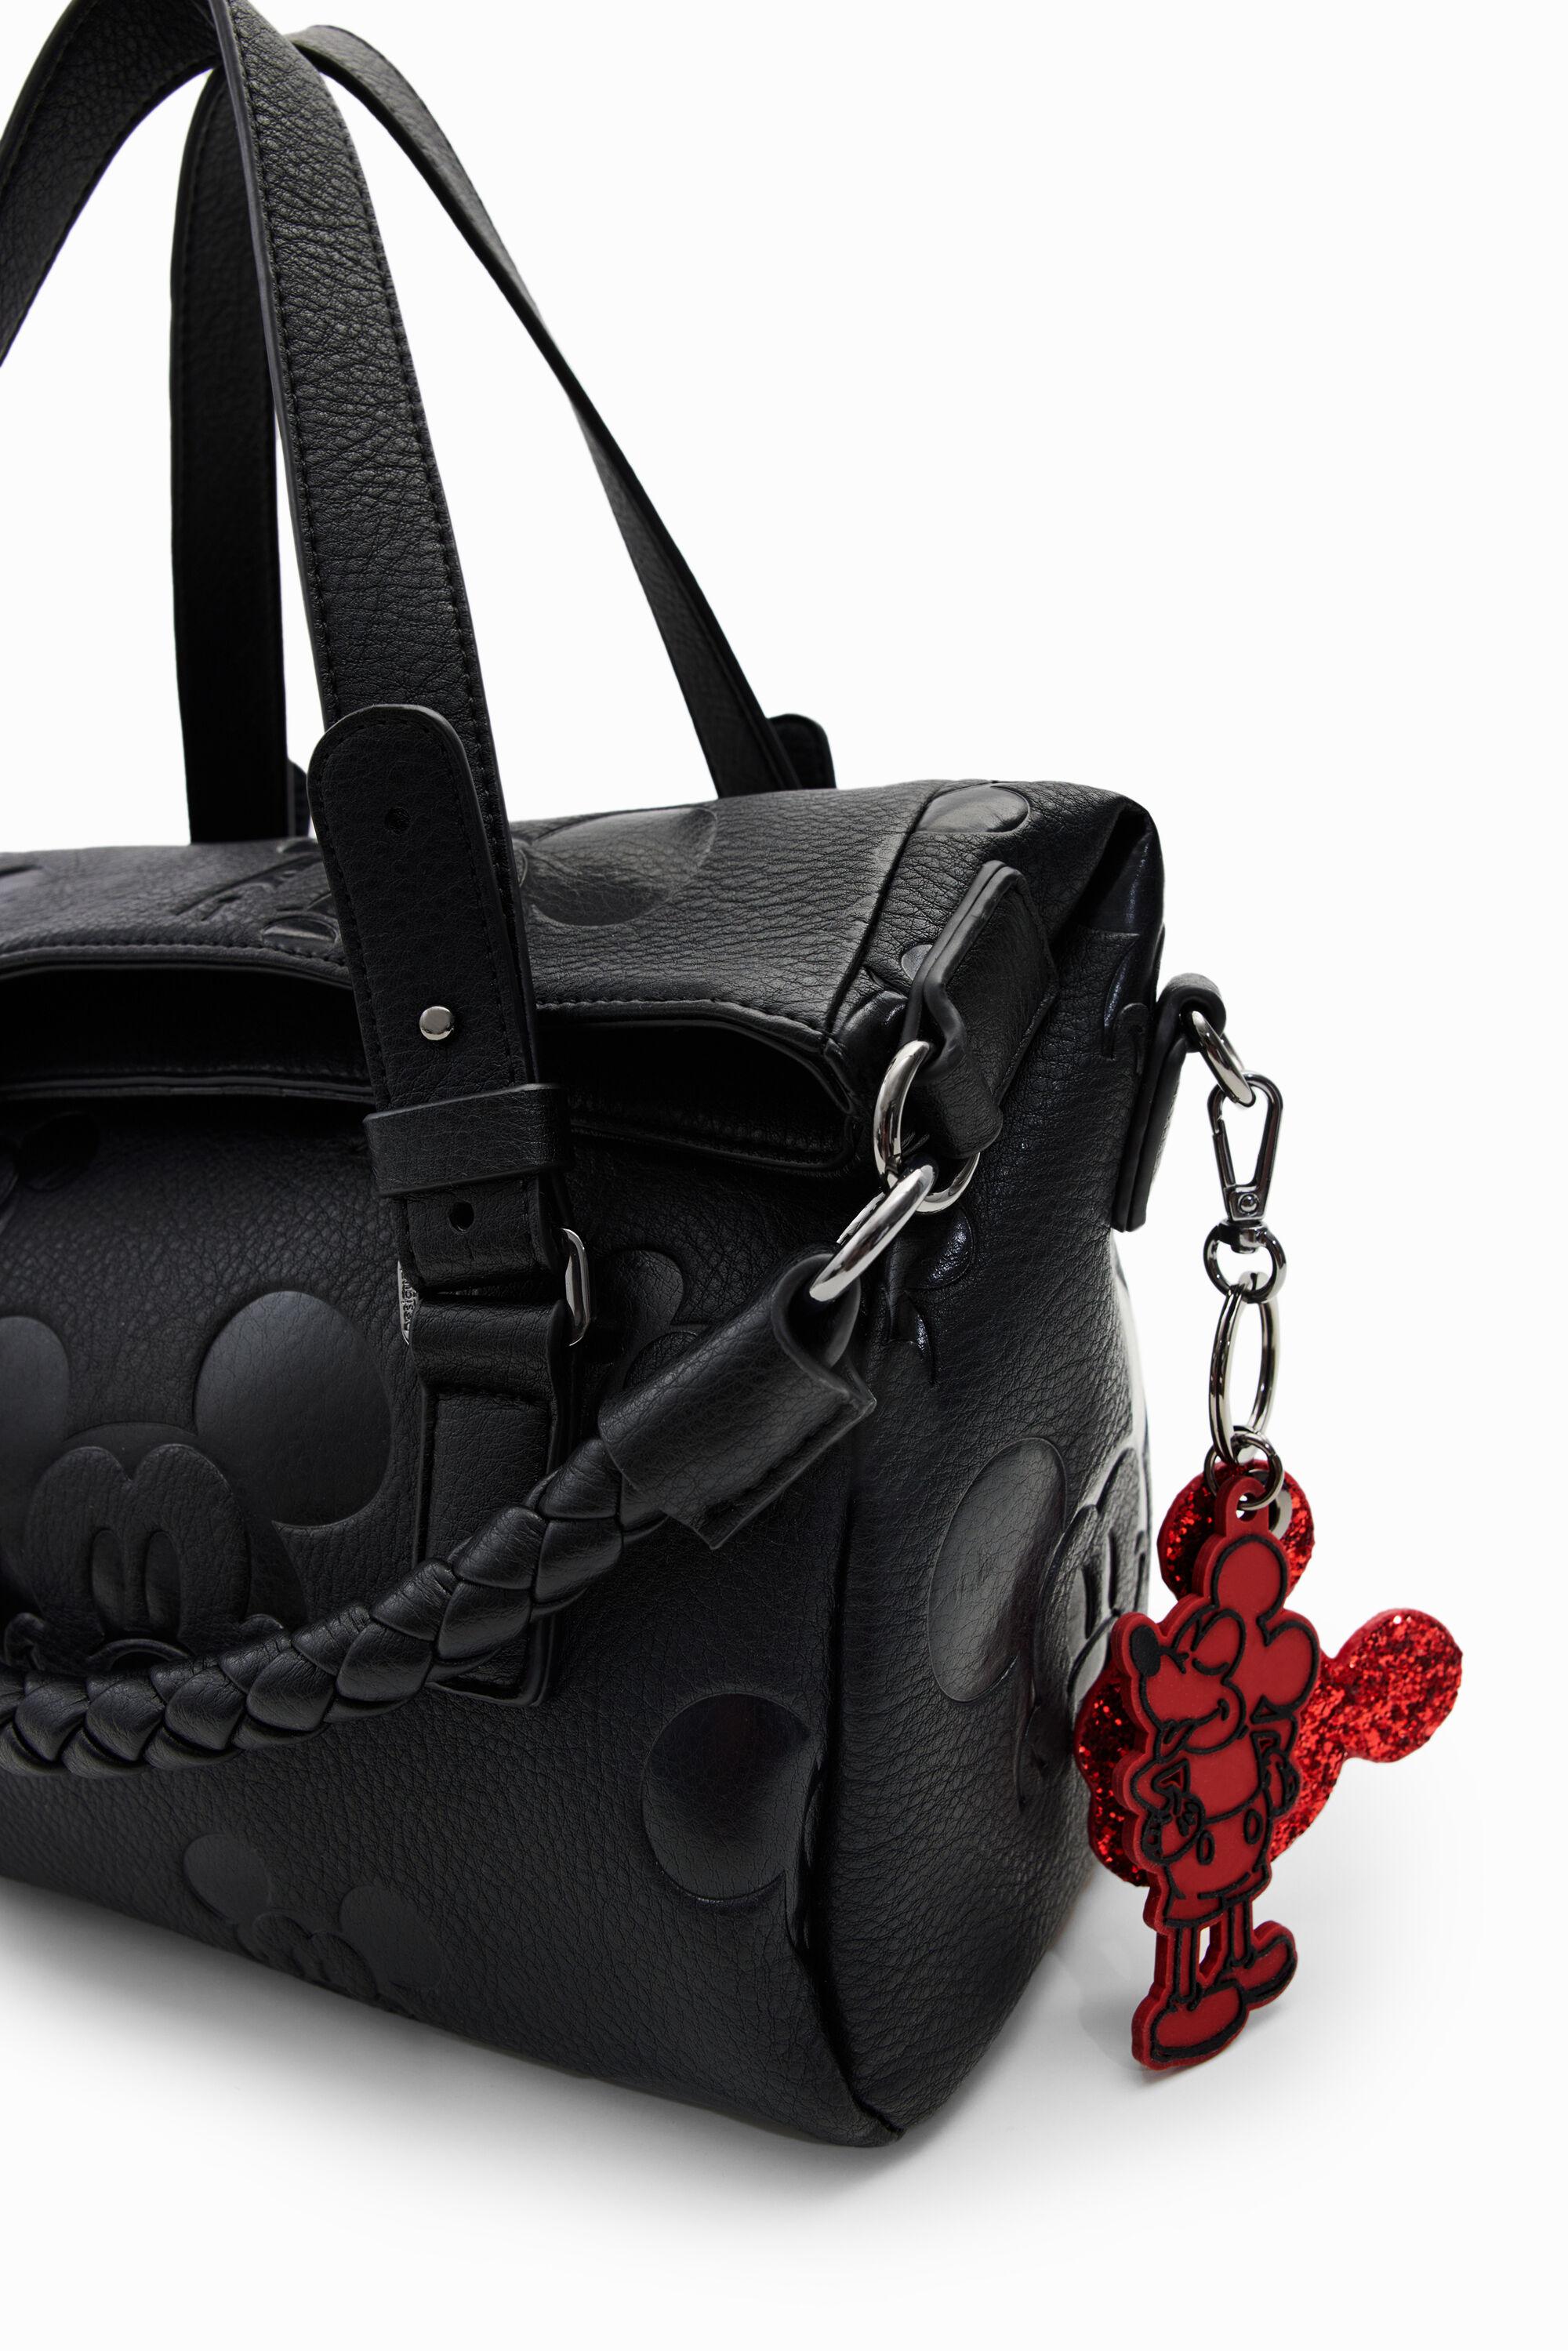 Desigual Midsize Mickey Mouse Bag in Black